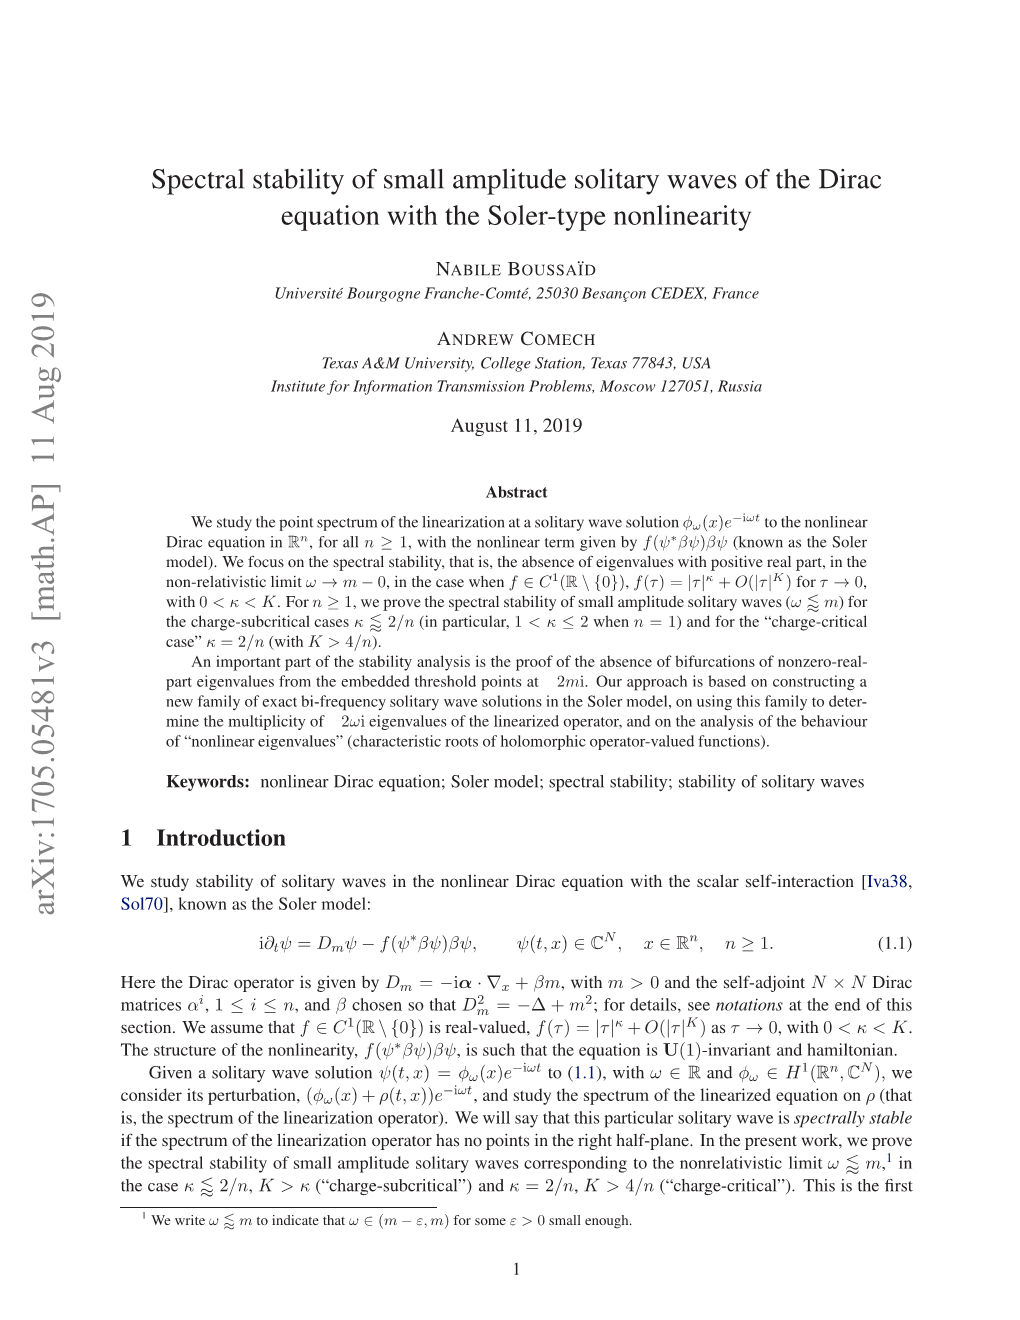 Spectral Stability of Small Amplitude Solitary Waves of the Dirac Equation